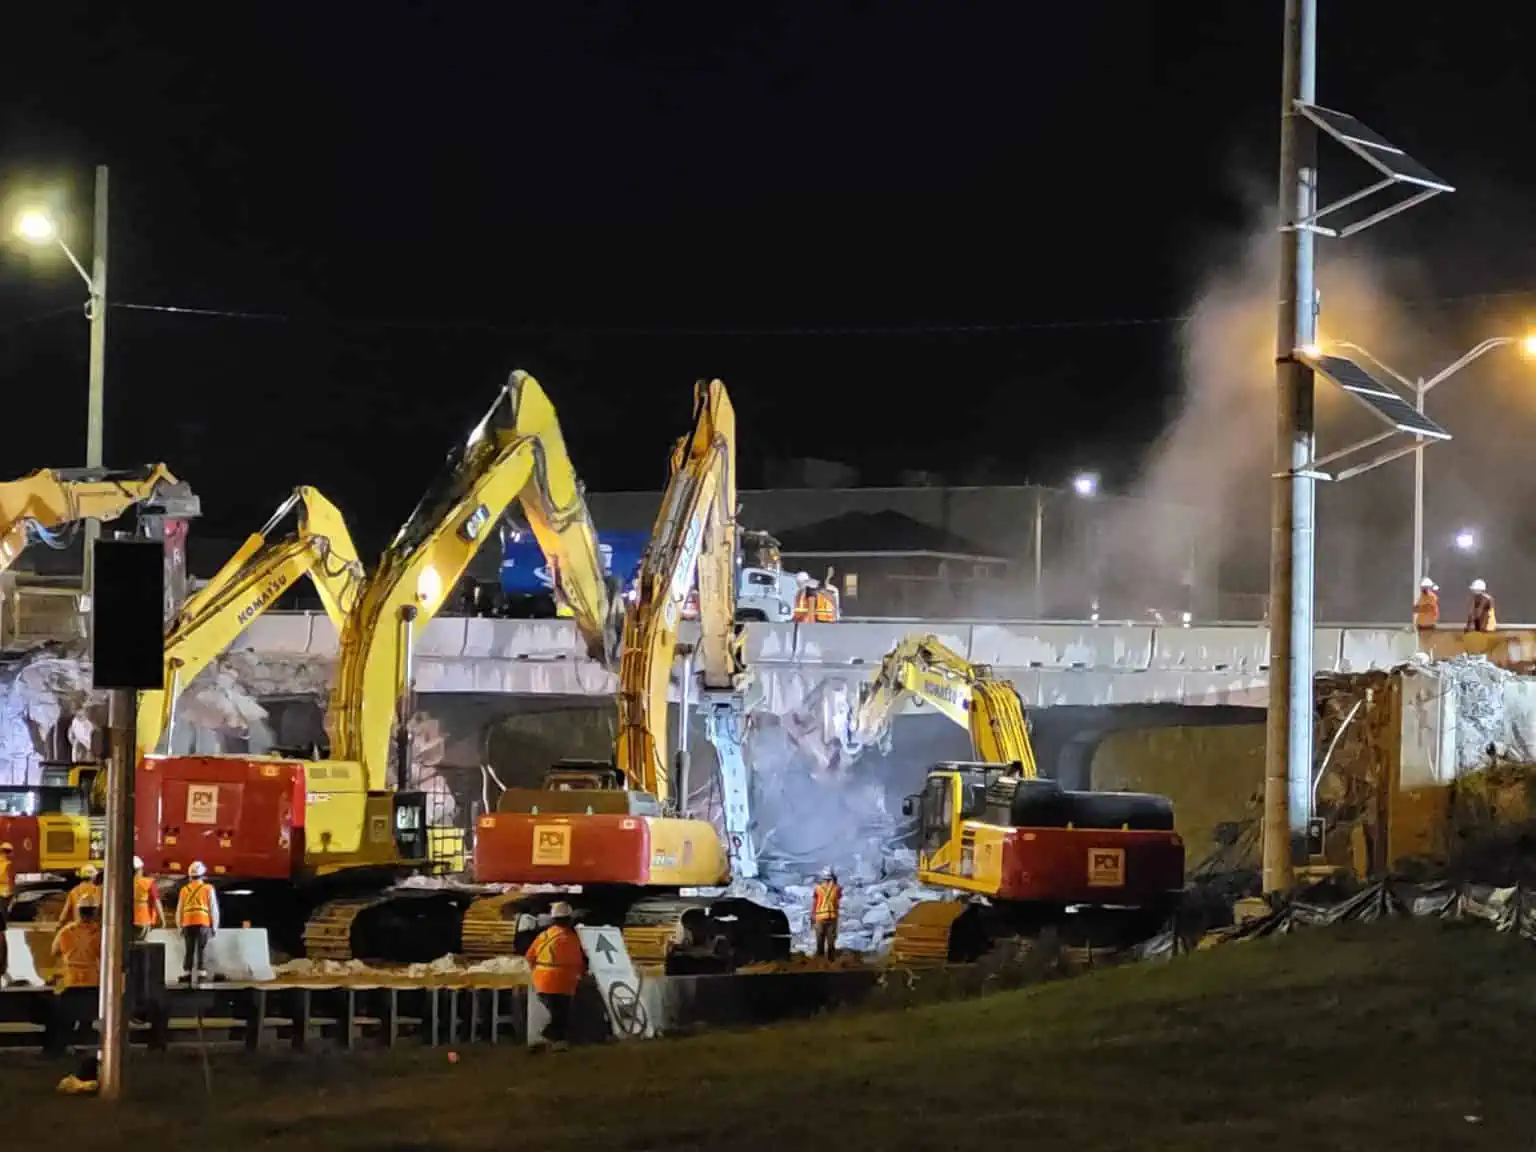 Highway 401 was closed in both directions between Simcoe and Drew Streets last night for the demolition of the Albert Street underpass bridge.